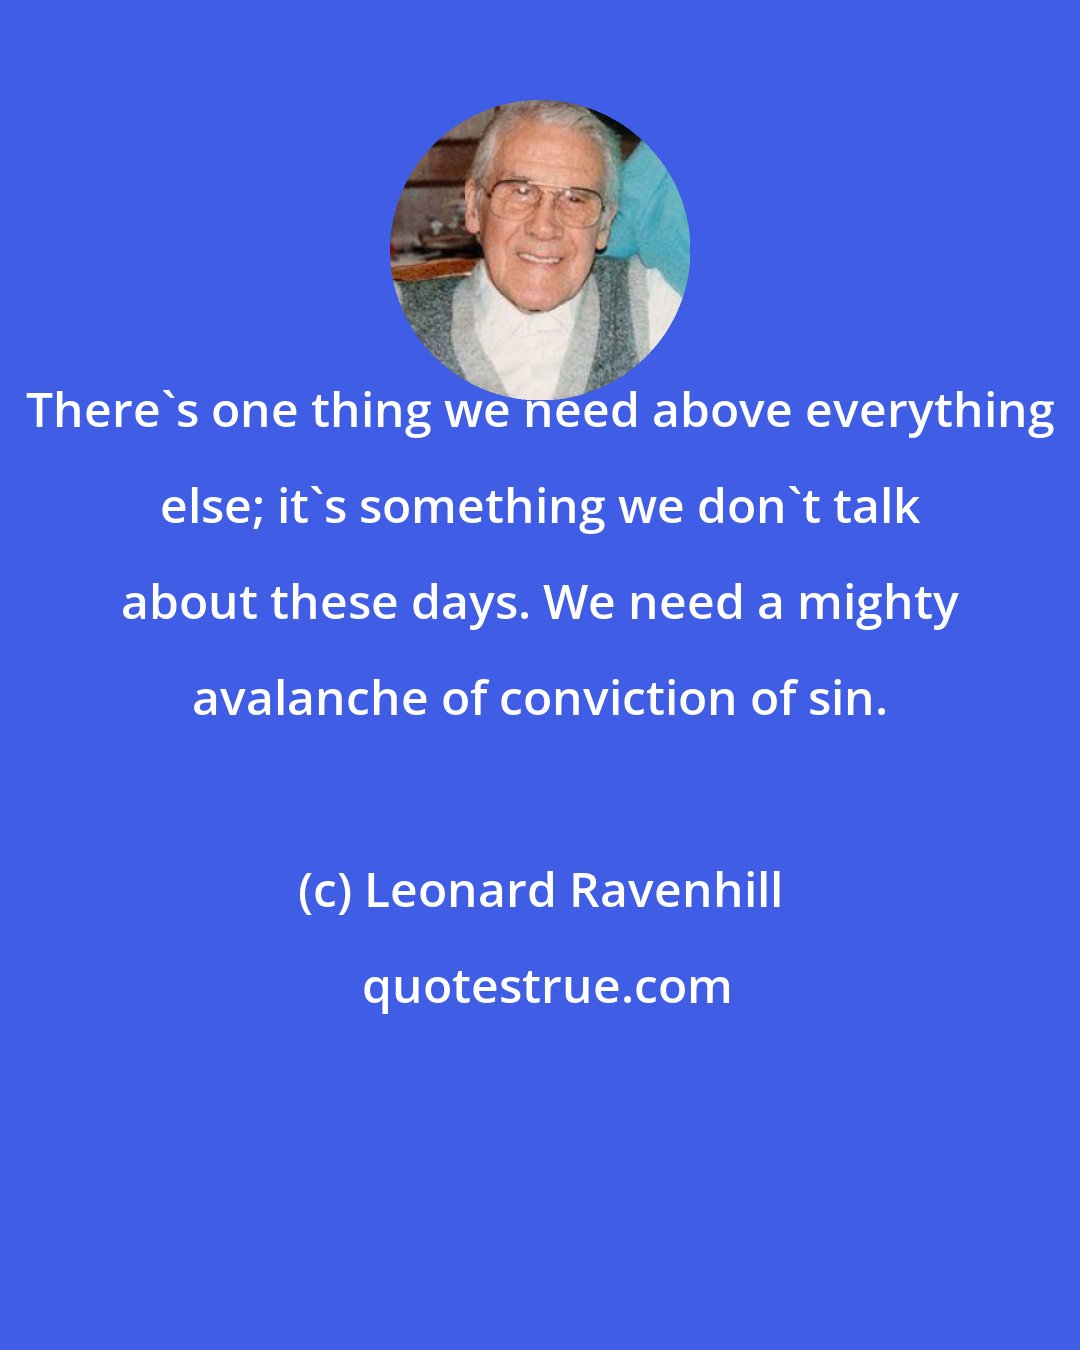 Leonard Ravenhill: There's one thing we need above everything else; it's something we don't talk about these days. We need a mighty avalanche of conviction of sin.